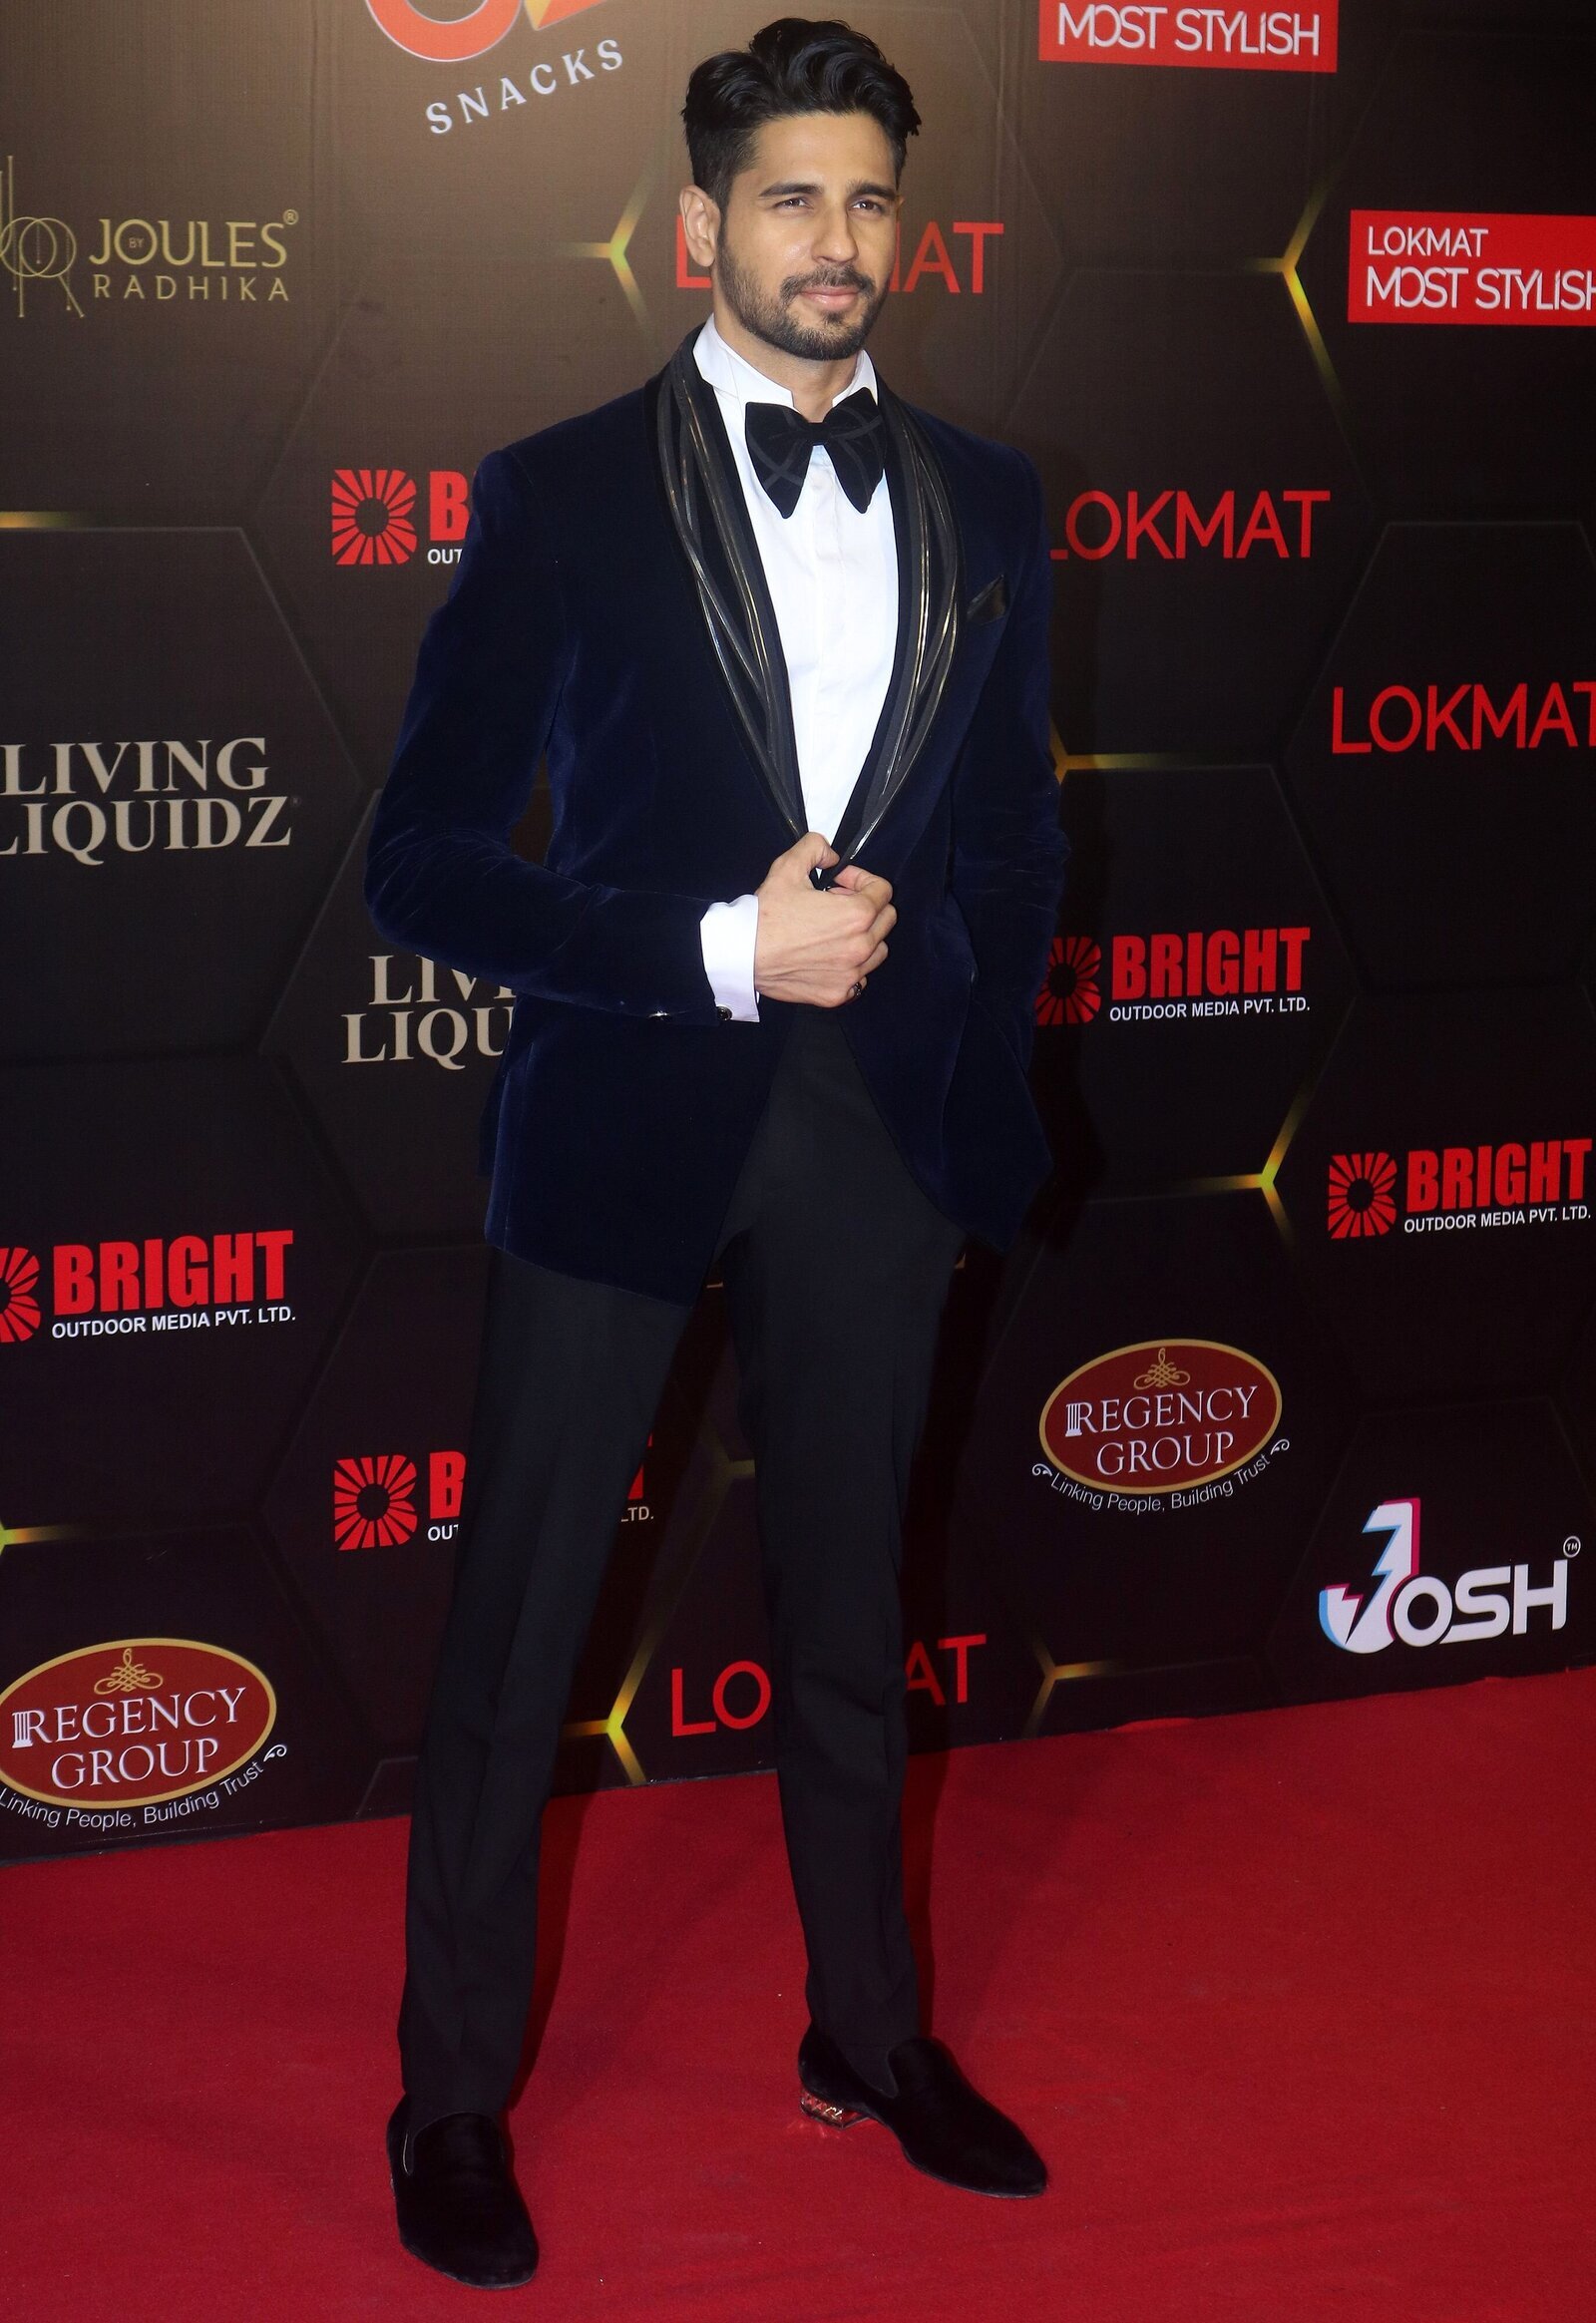 Sidharth Malhotra - Photos: Celebs At The Lokmat Most Stylish Awards 2021 | Picture 1845754